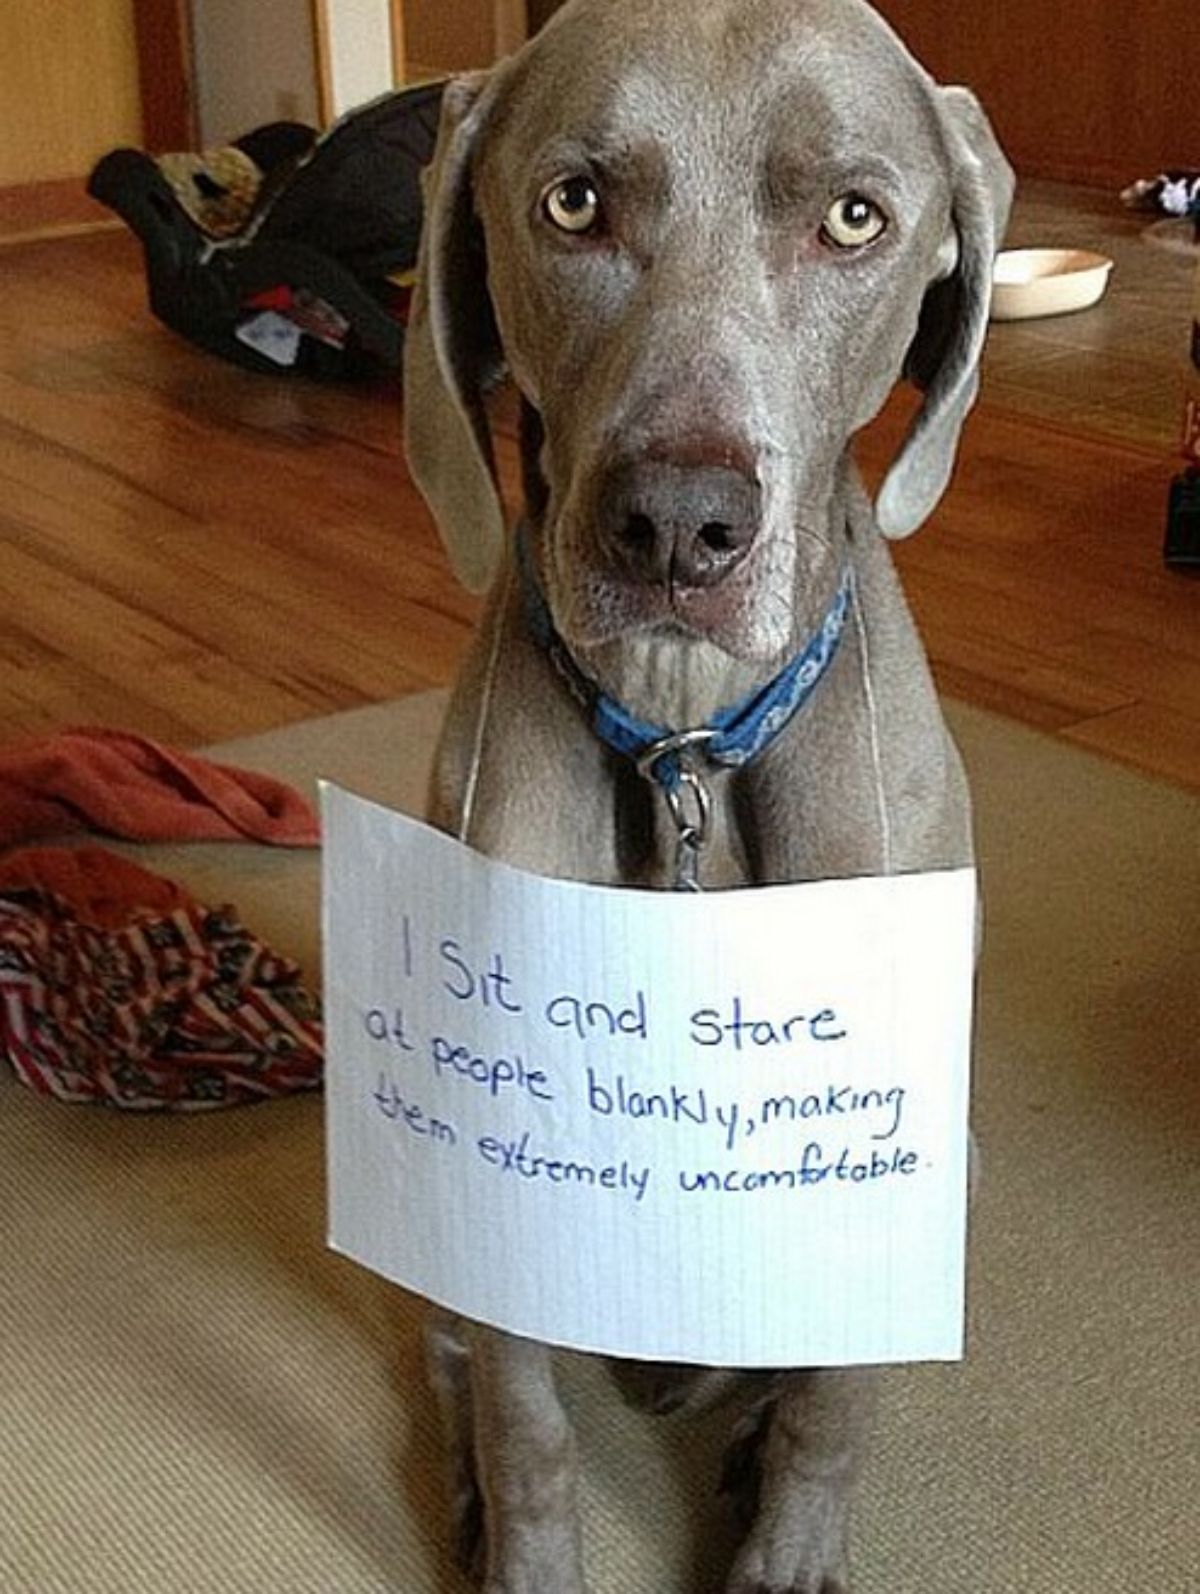 grey dog sitting on the floor and staring mournfully with a note saying "I sit and stare at people blankly, making them extremely uncomfortable"